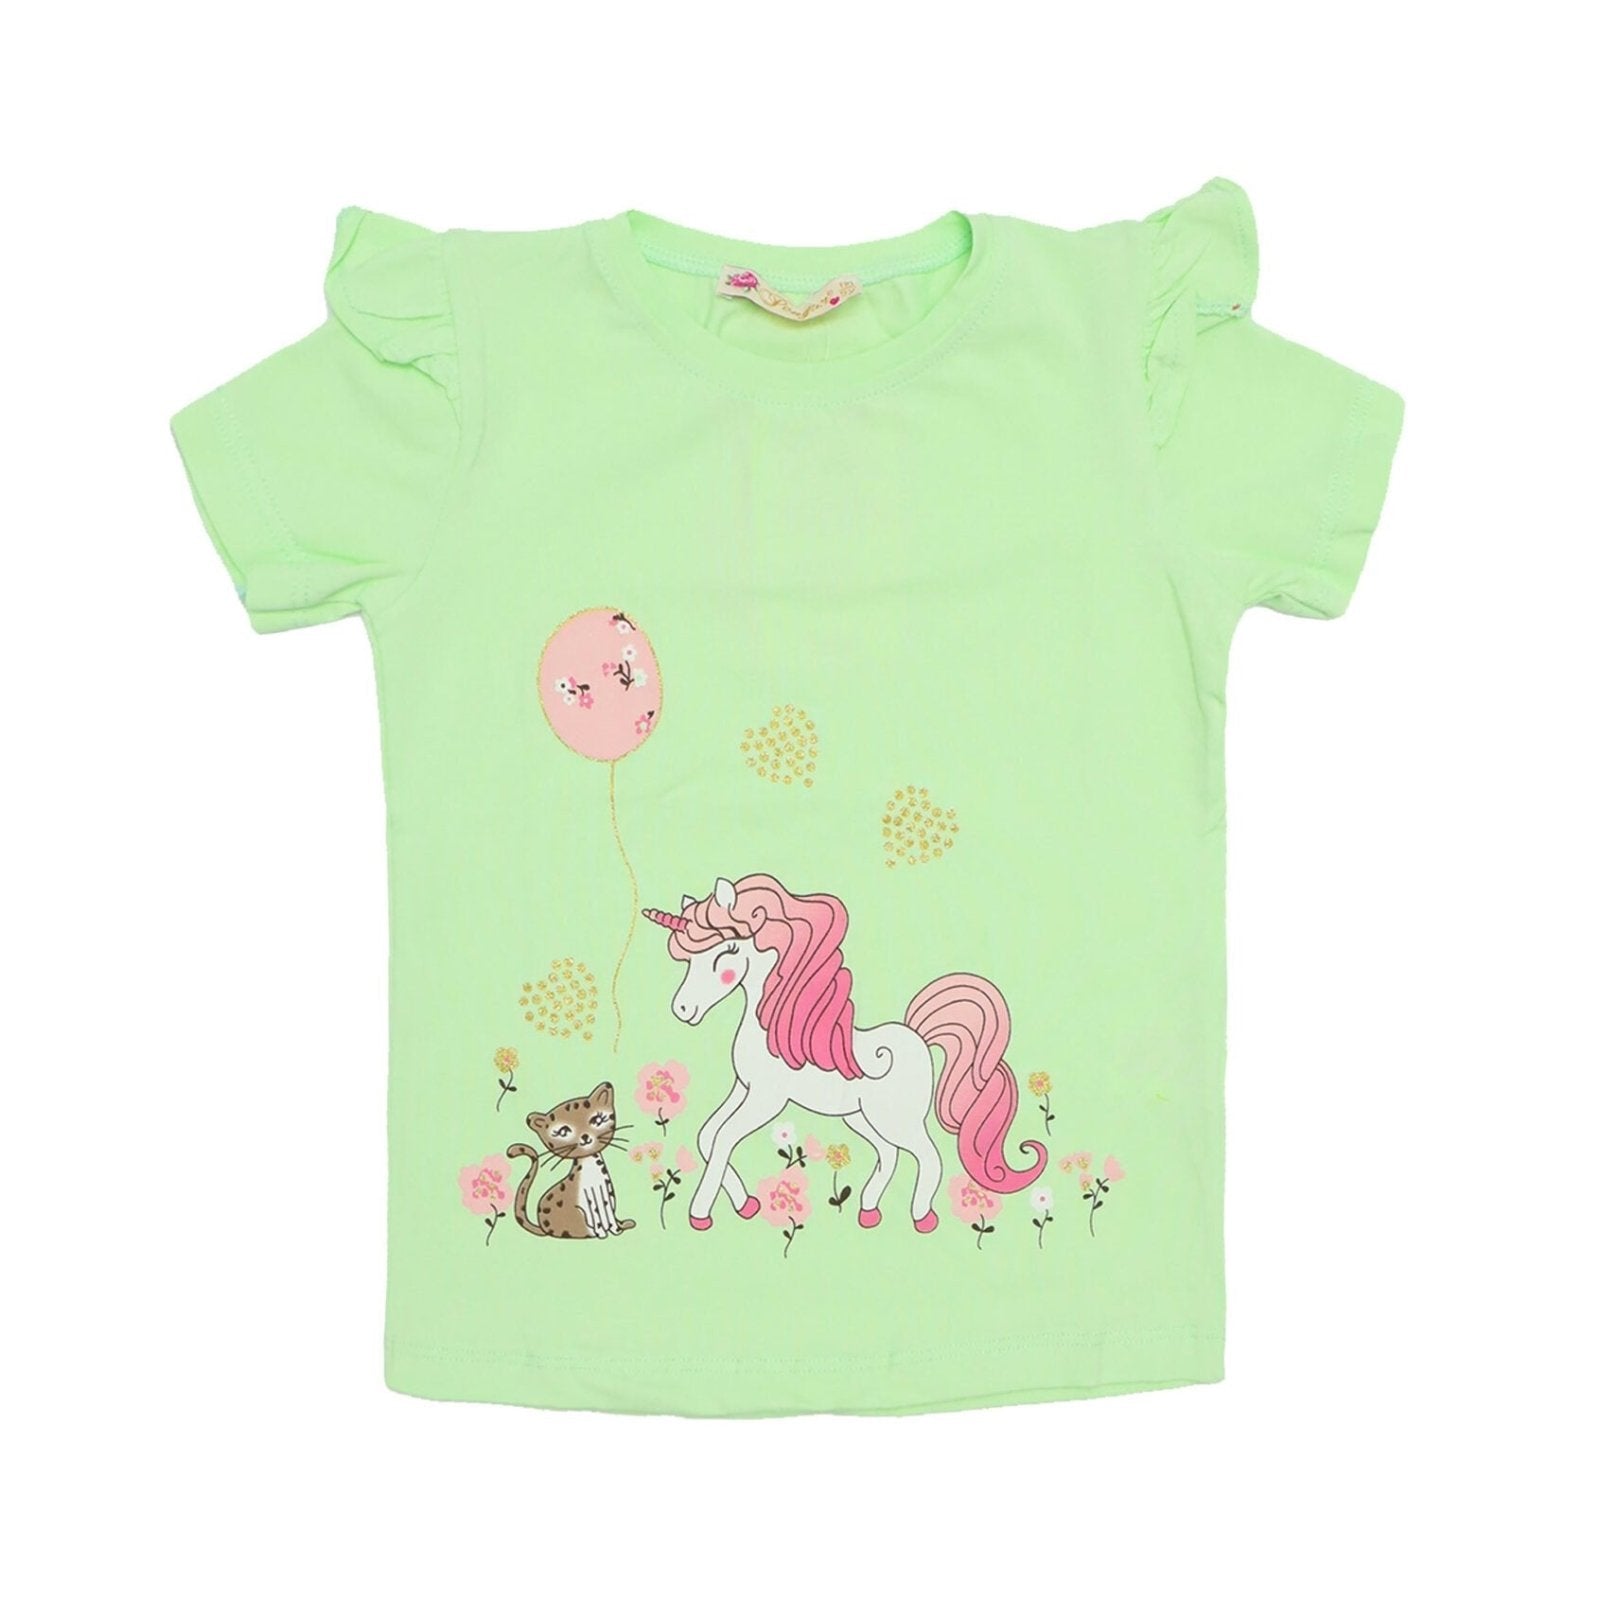 Girls Shirt Unicorn Print Green Color by Made in Turkey